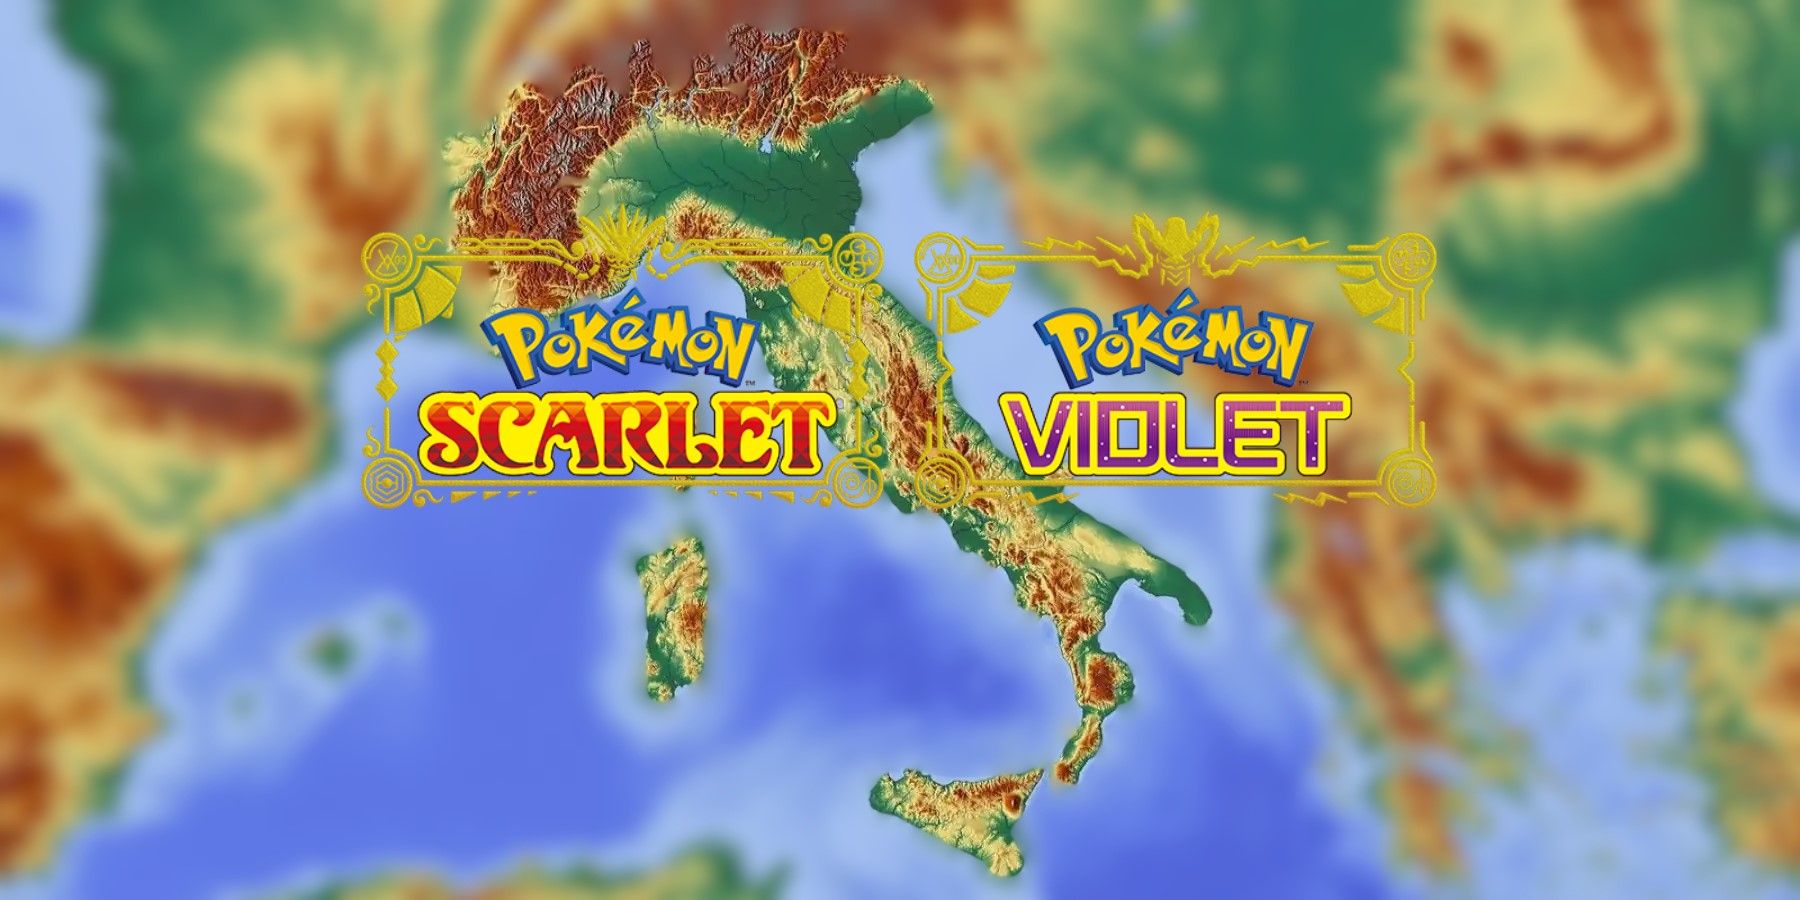 10 Pokemon Scarlet and Violet tips and tricks